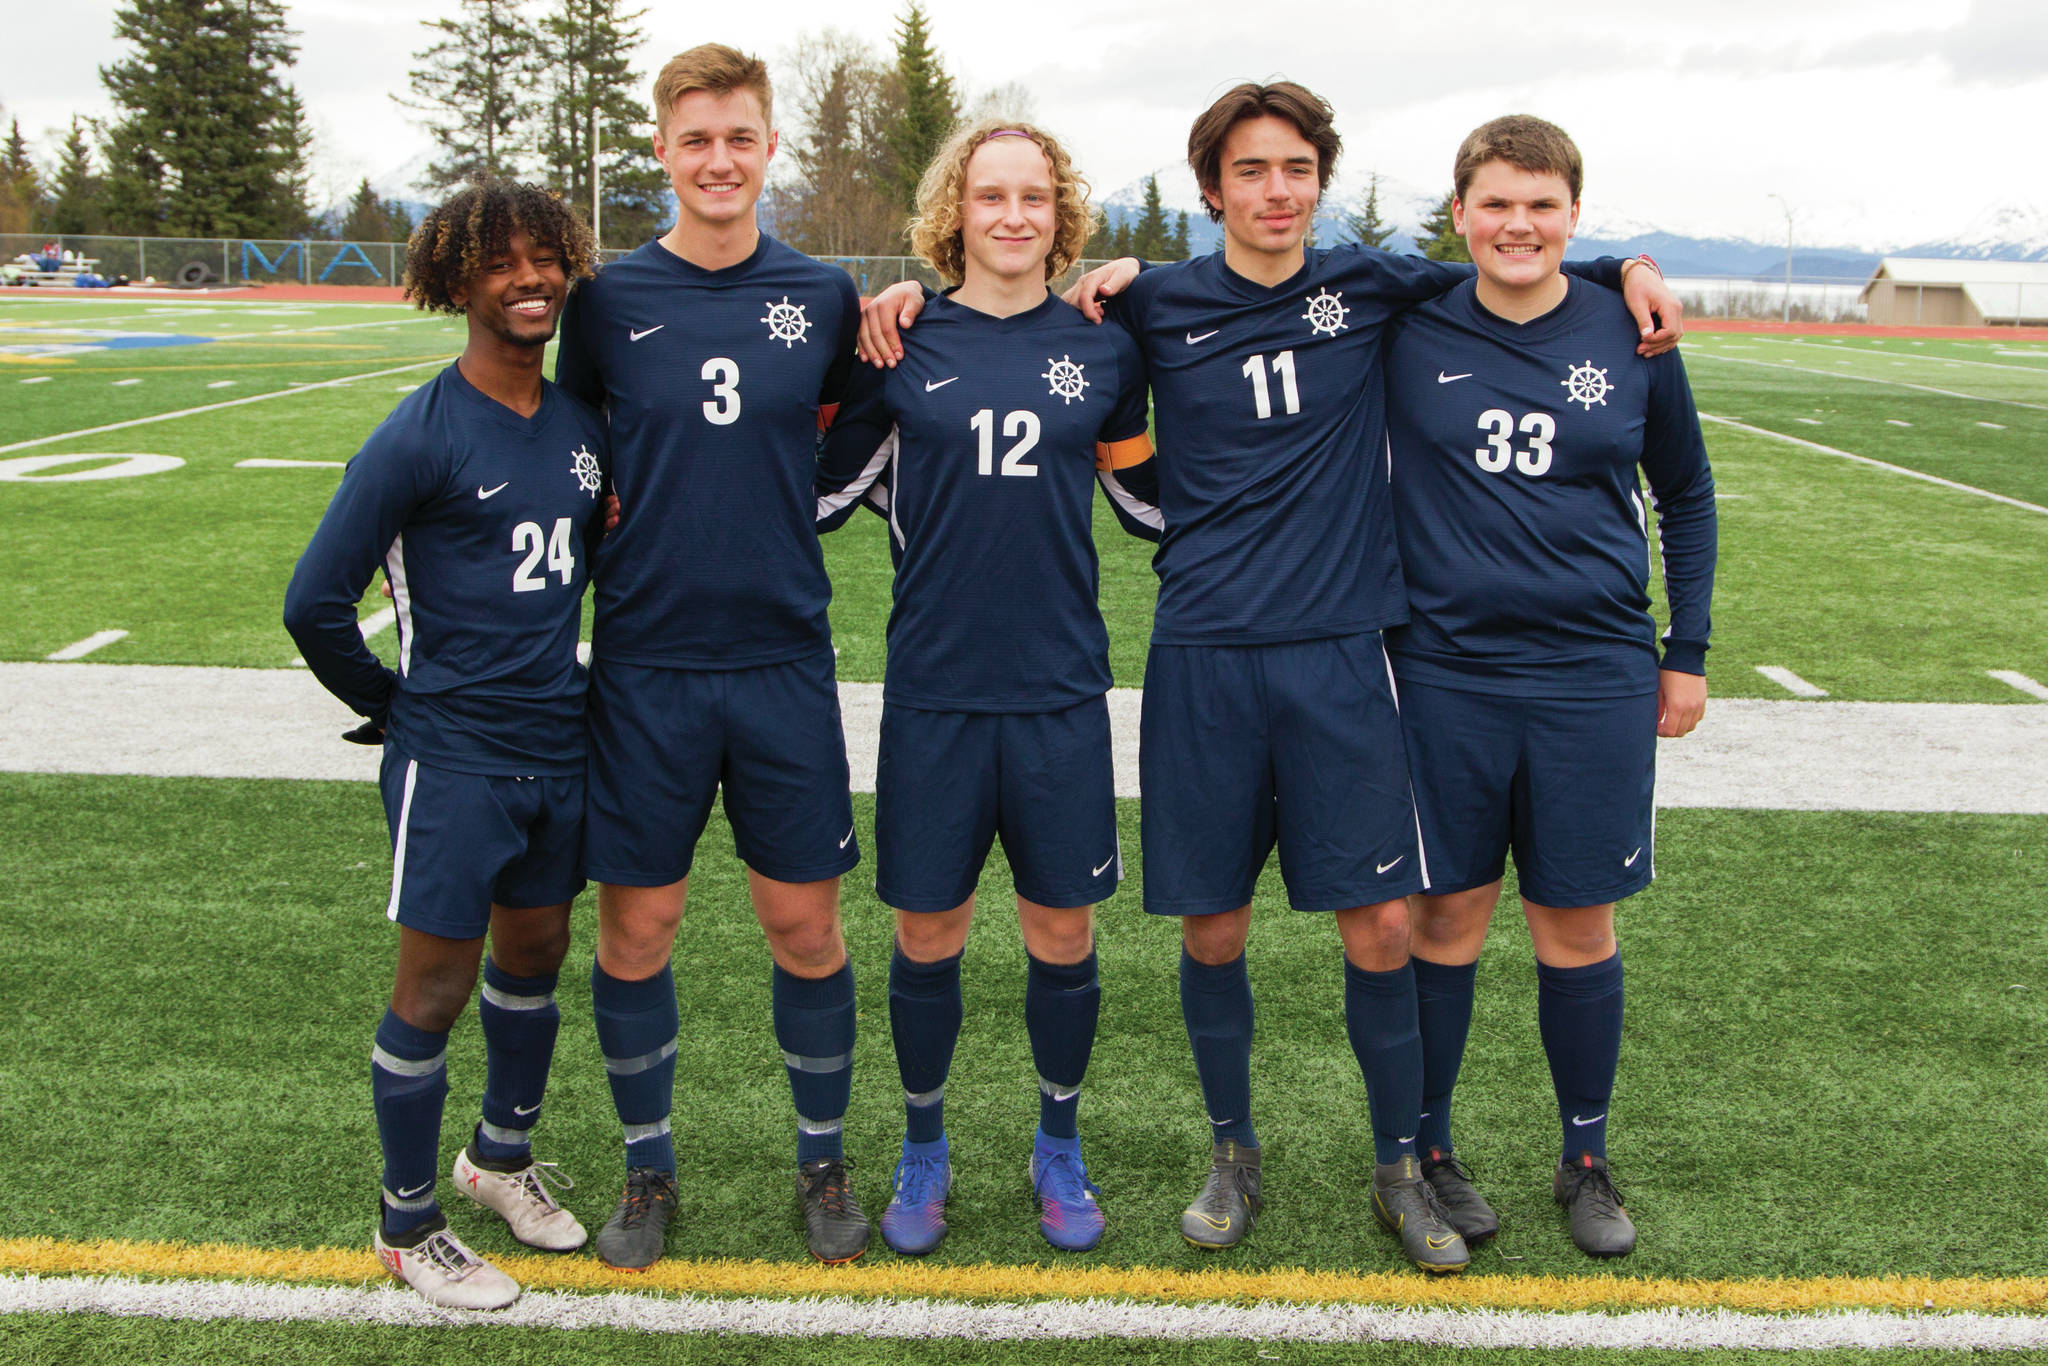 Photo by Sarah Knapp / Homer News
The seniors on the Homer High School boys soccer team were recognized in a ceremony May 14. Pictured left to right are Eyoab Knapp, Clayton Beachy, Parker Lowney, Tanner Reid and Owen Glasman. Not pictured is Austin Cline.